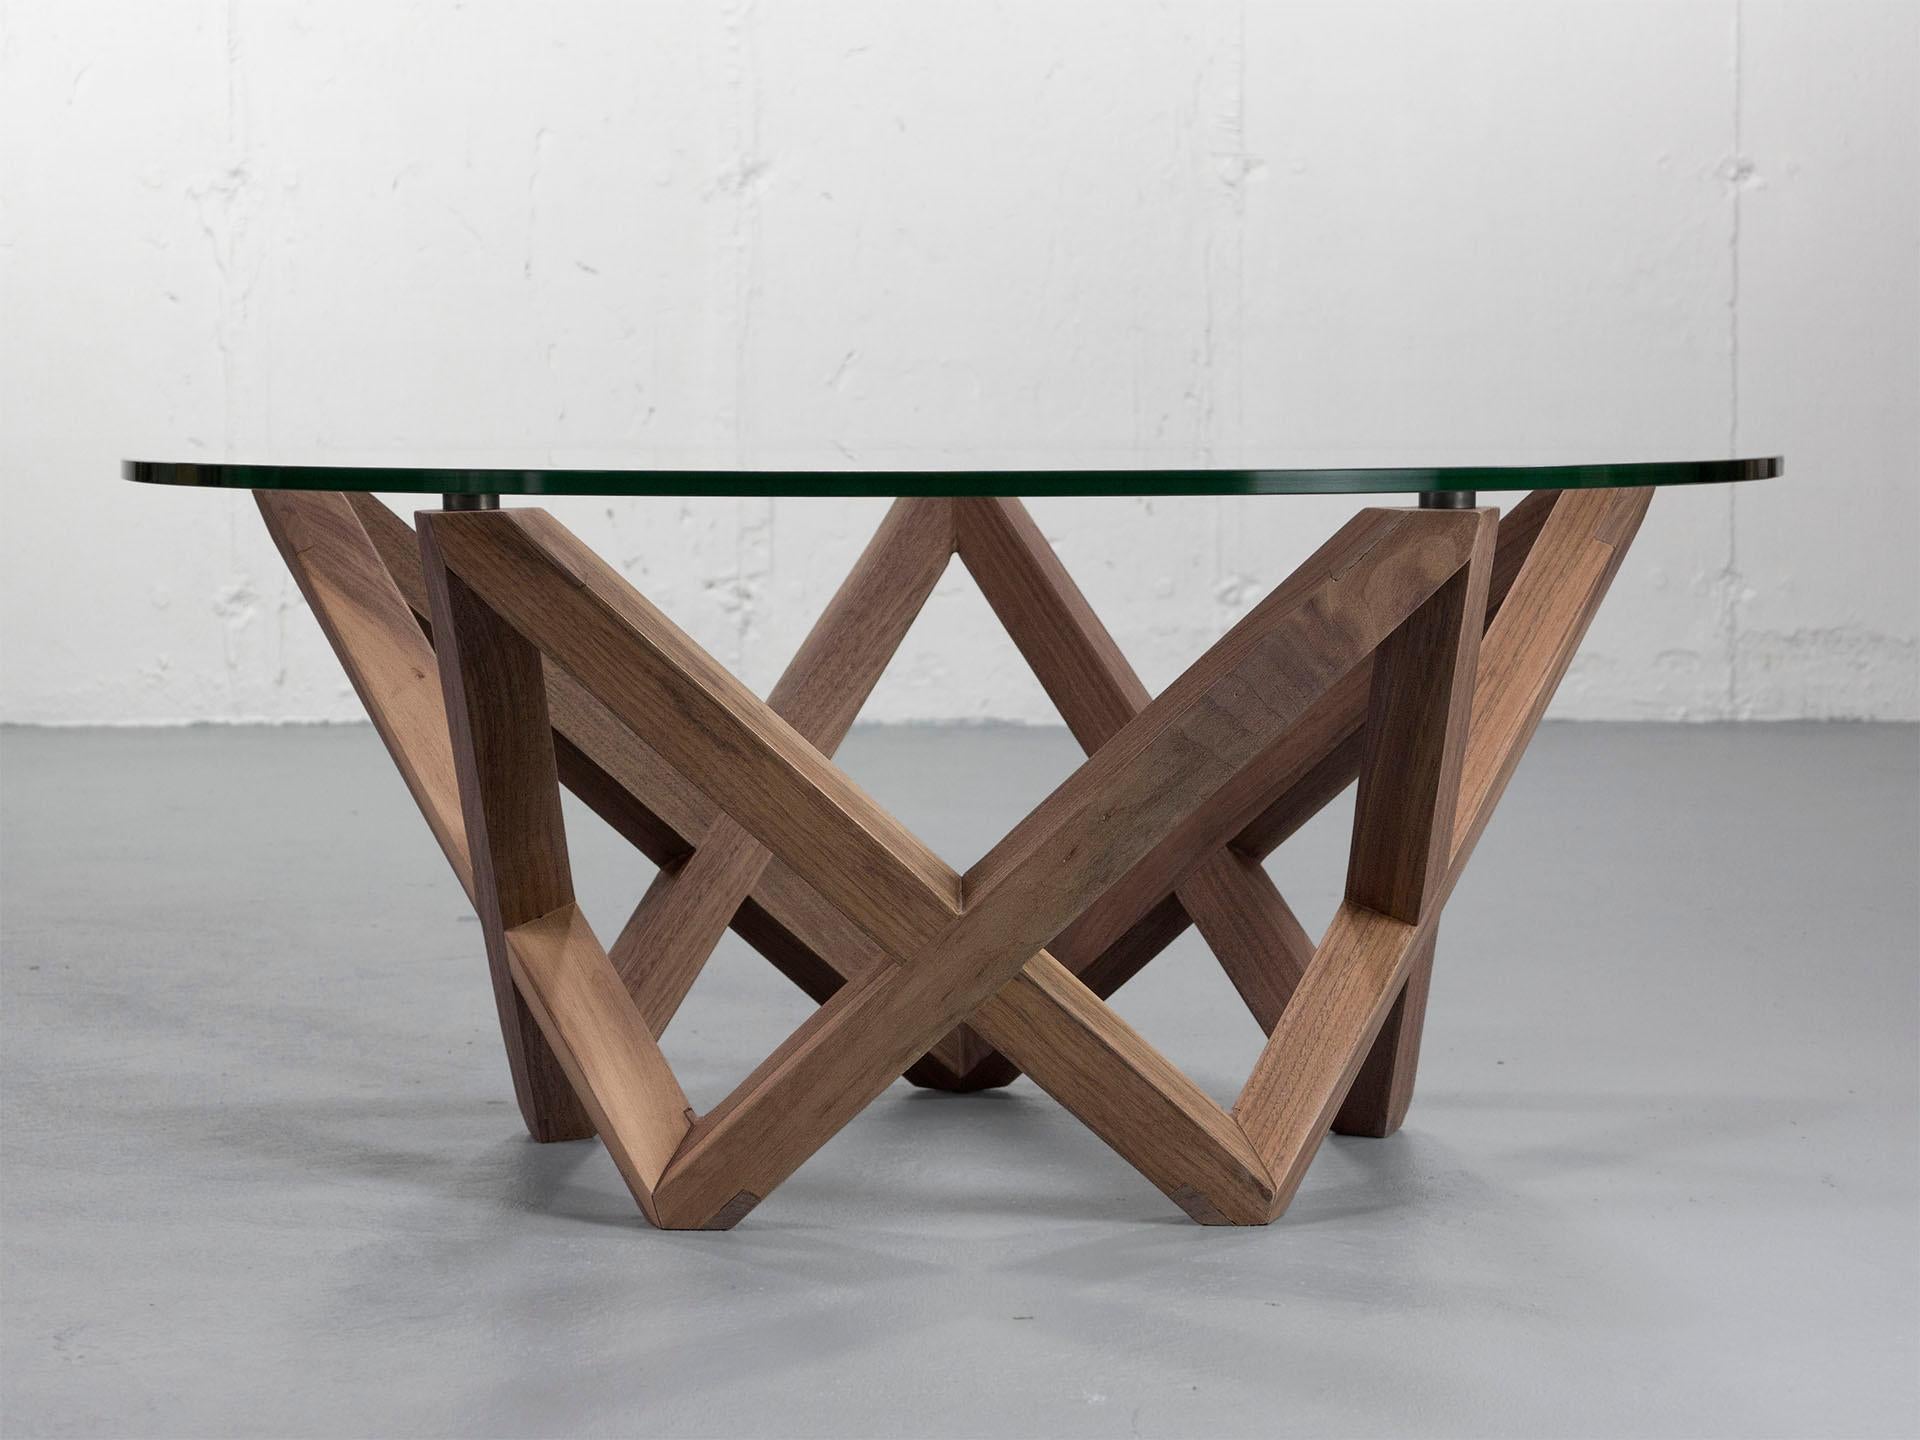 The Star Coffee Table features a round glass top suspended above a five-point star made of solid black walnut. The interlocking legs seamlessly flow around the table’s perimeter and are assembled using intricately hand-cut joinery techniques. This